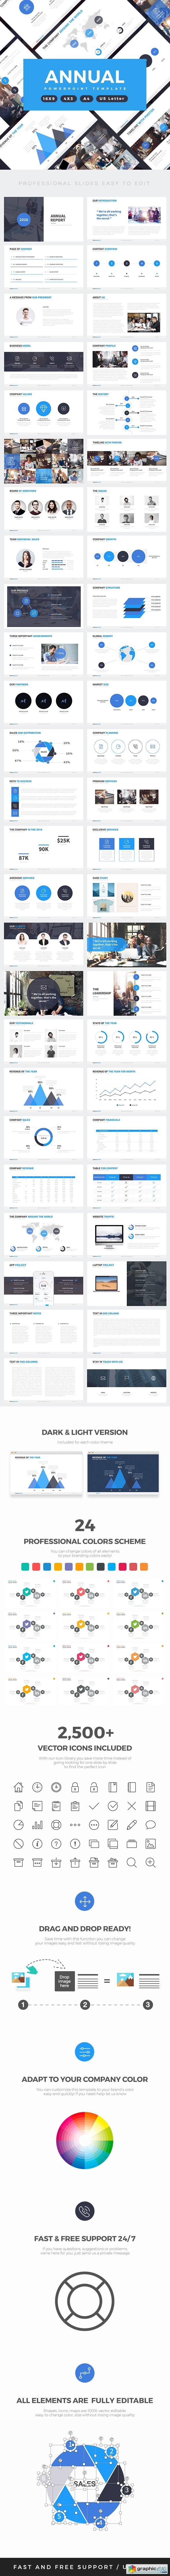 Annual Report Professional Powerpoint Template